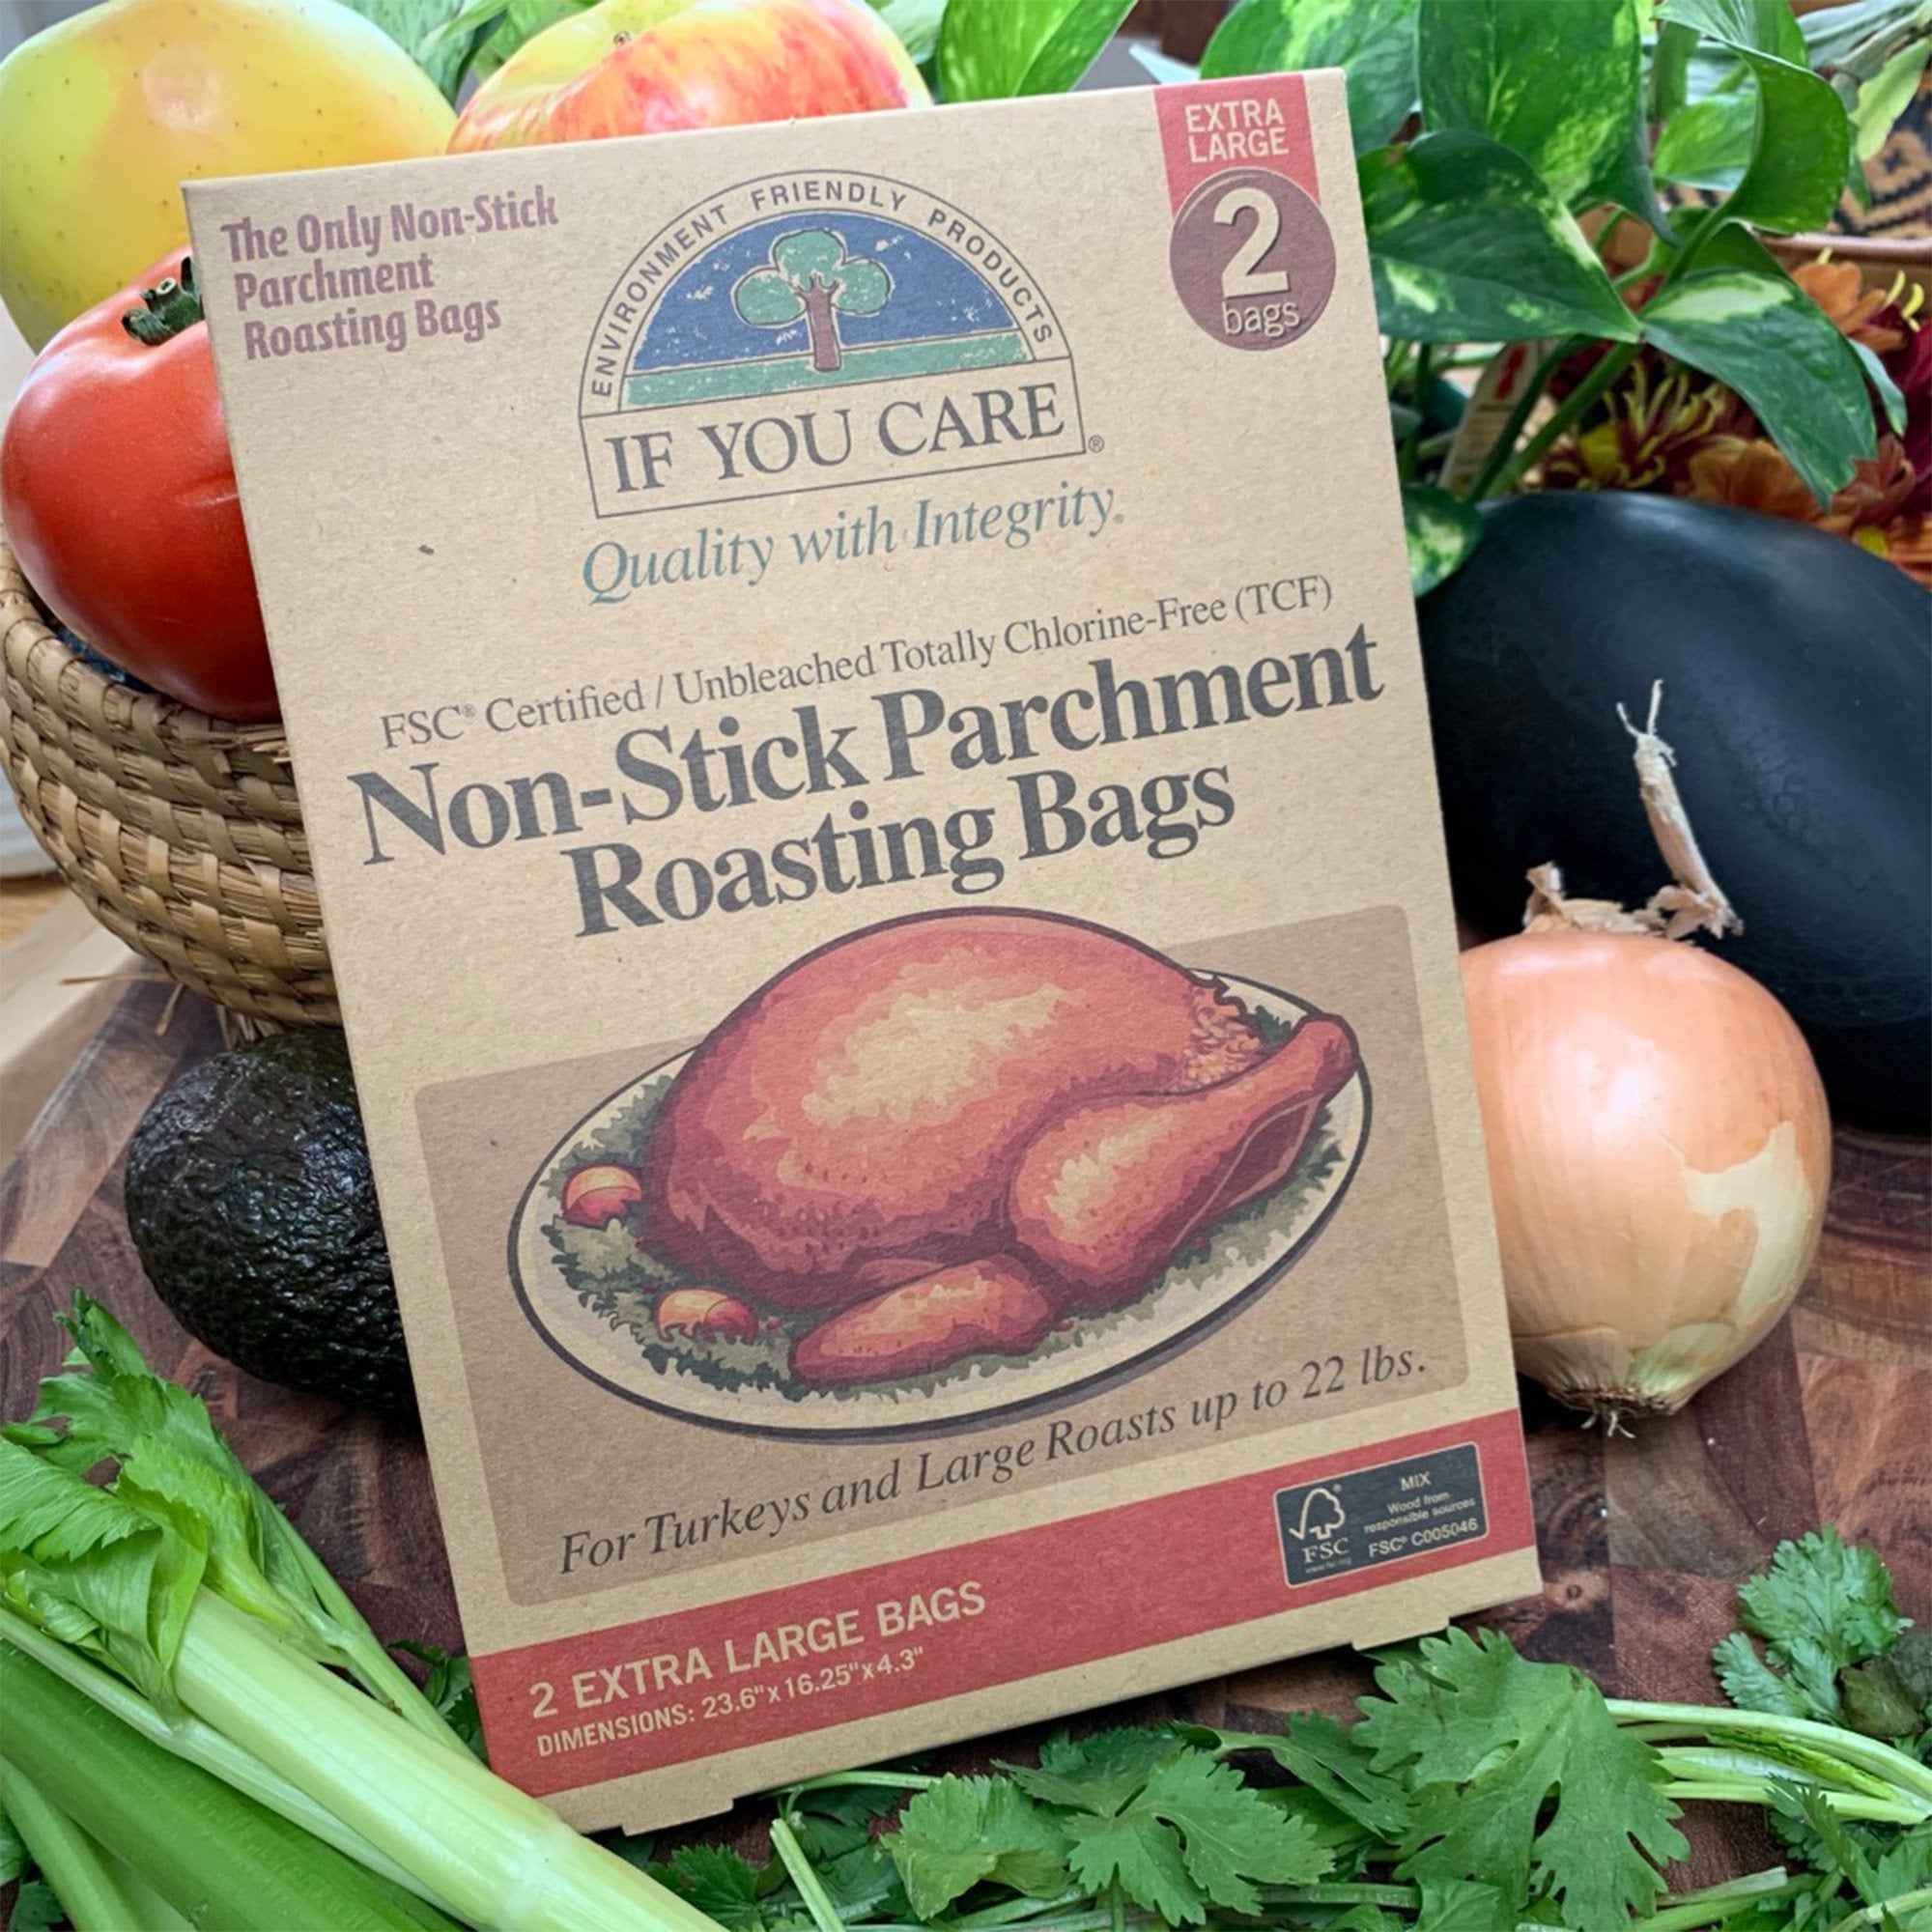 If You Care - Non-Stick Parchment Roasting Bags - XL for turkeys and large  roasts up to 22lbs